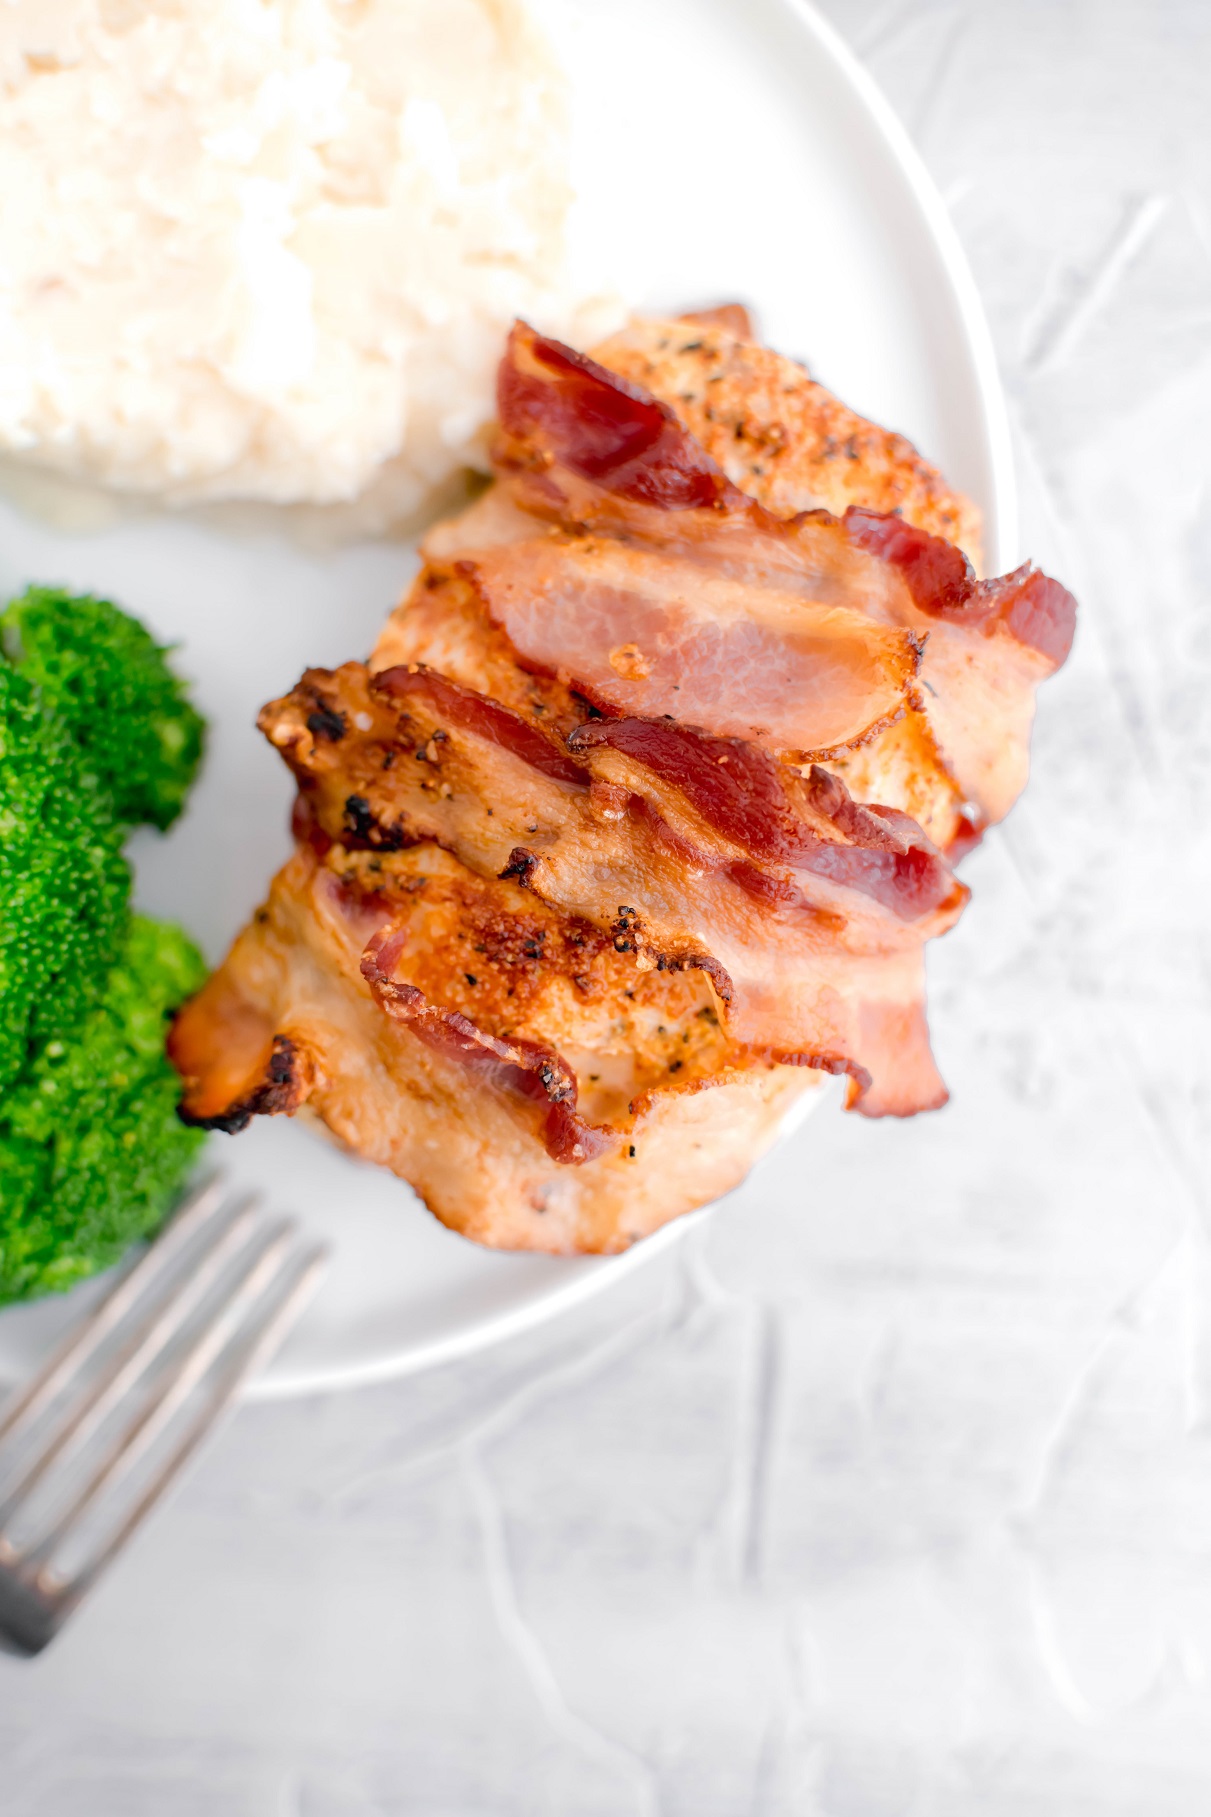 Bacon wrapped pork chop on a white round plate with broccoli and mashed potatoes on the side.